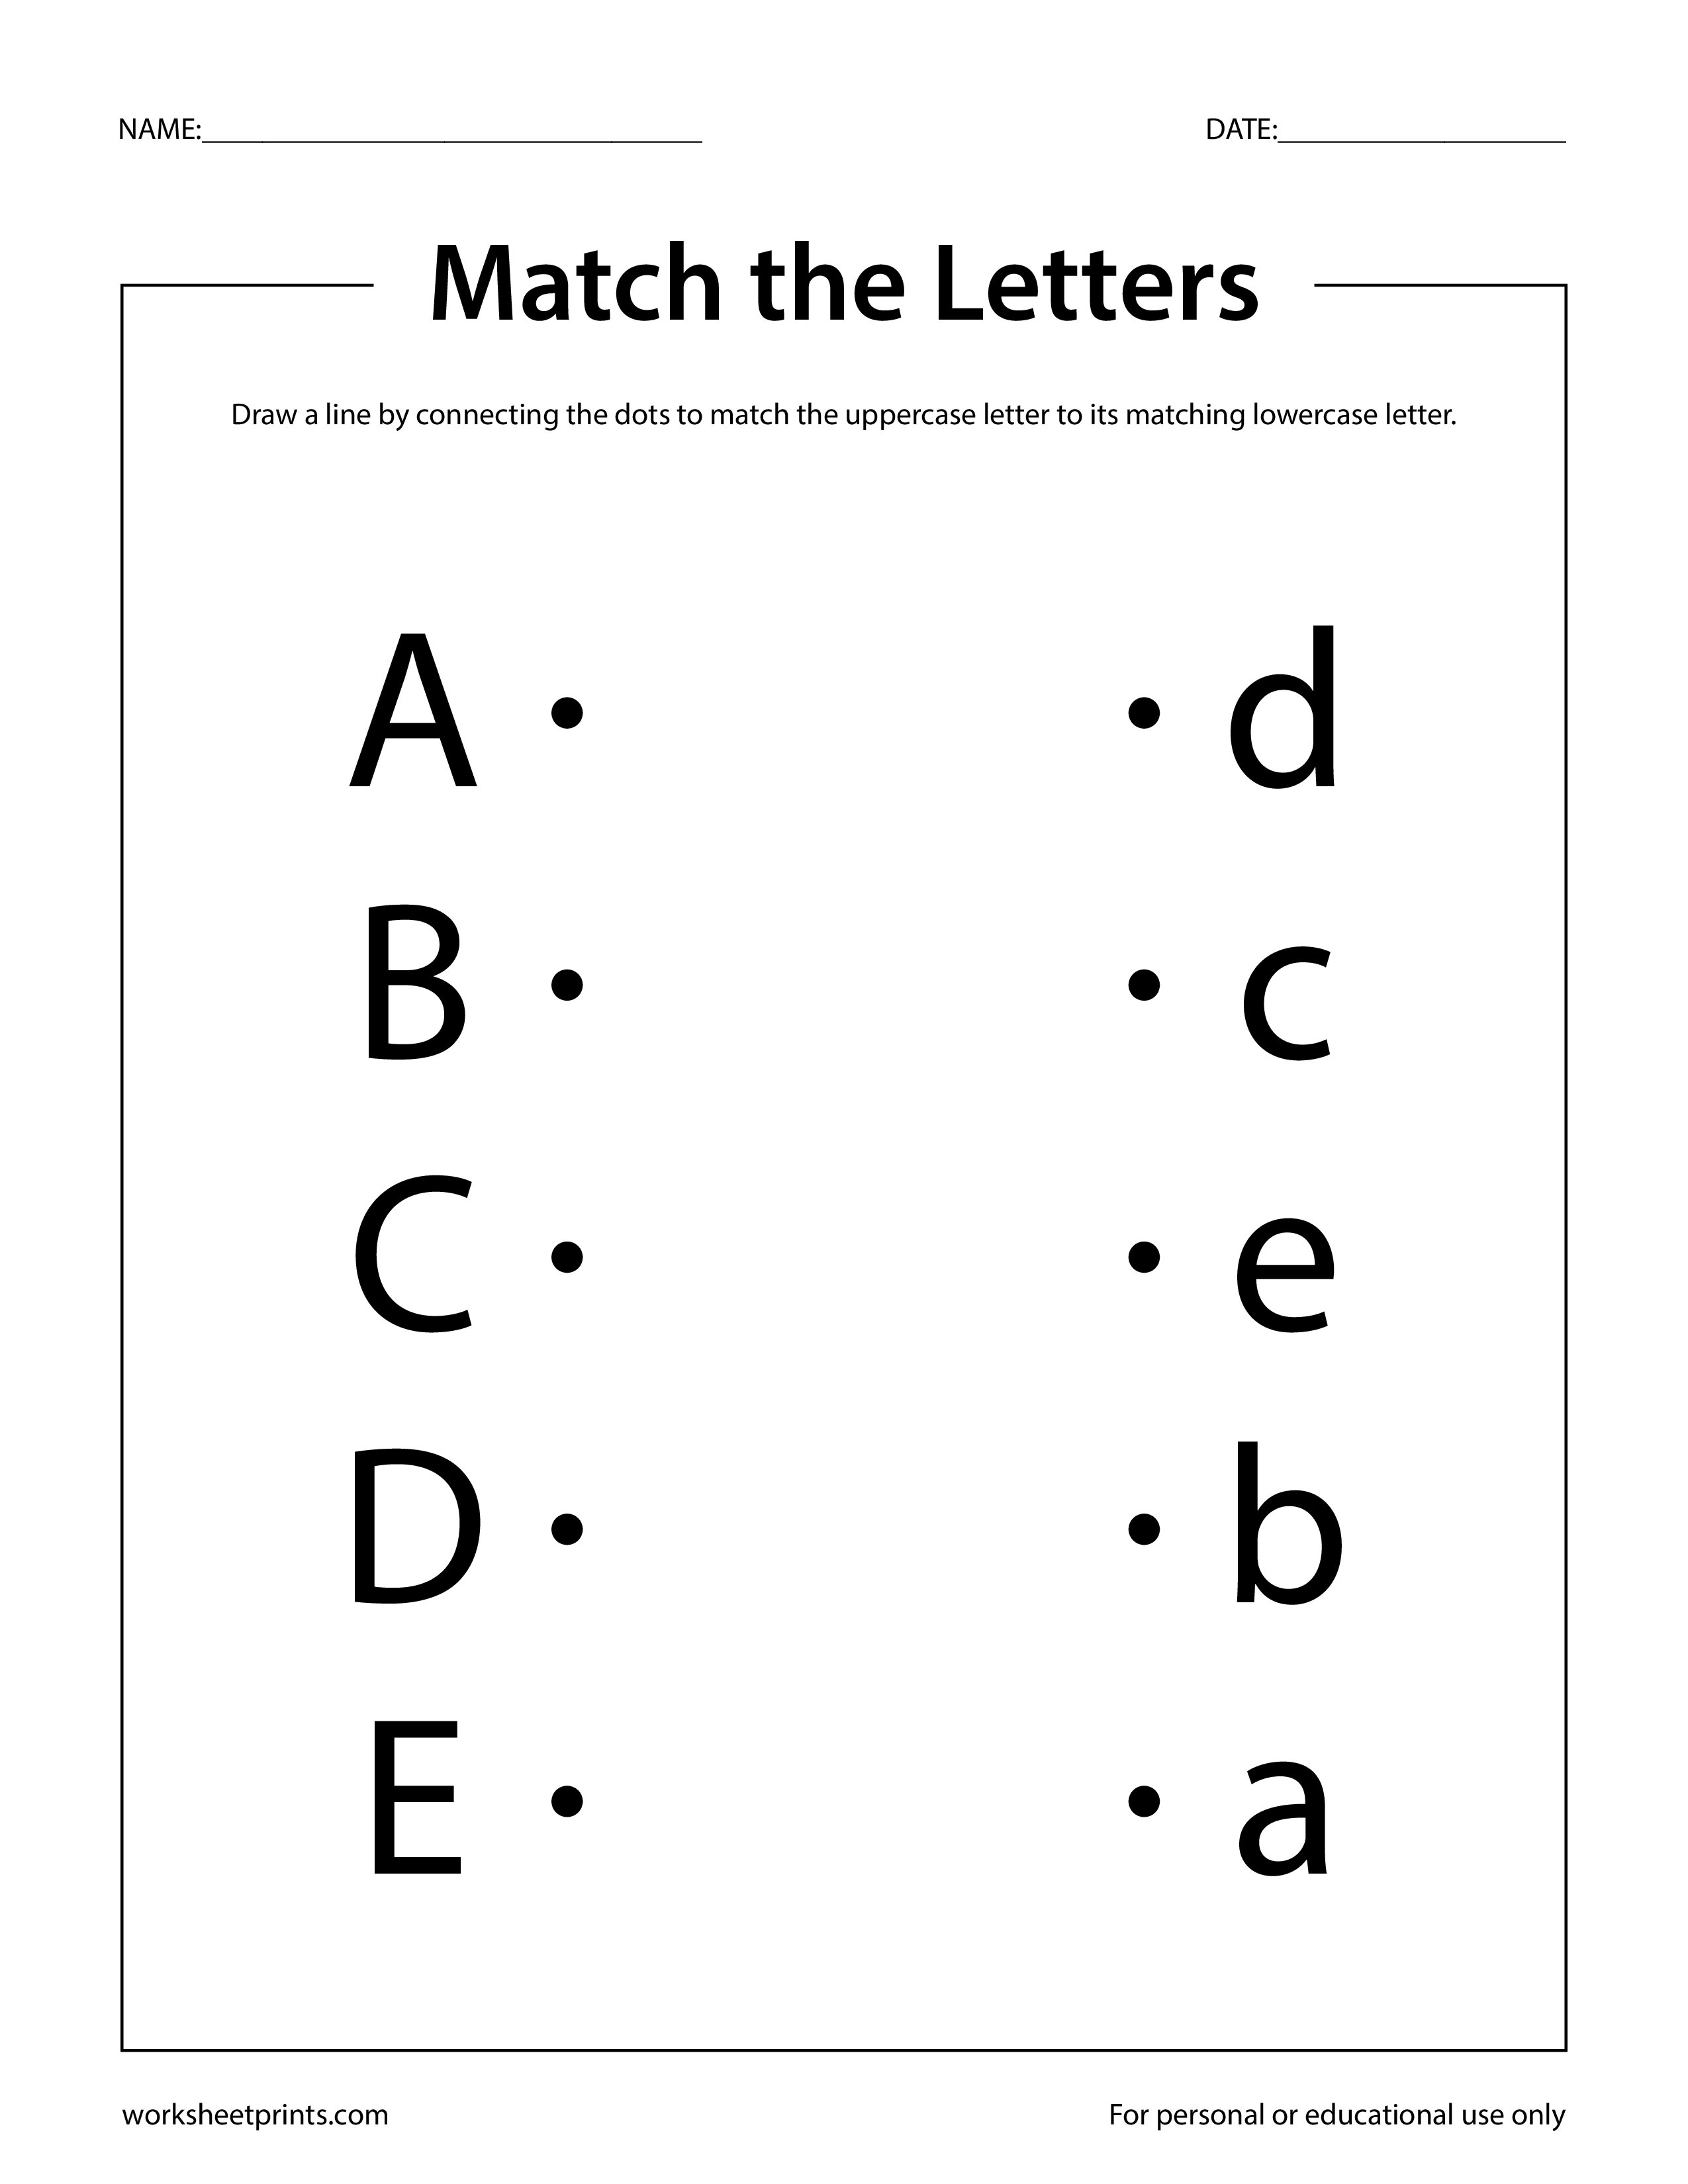 Match the Letters